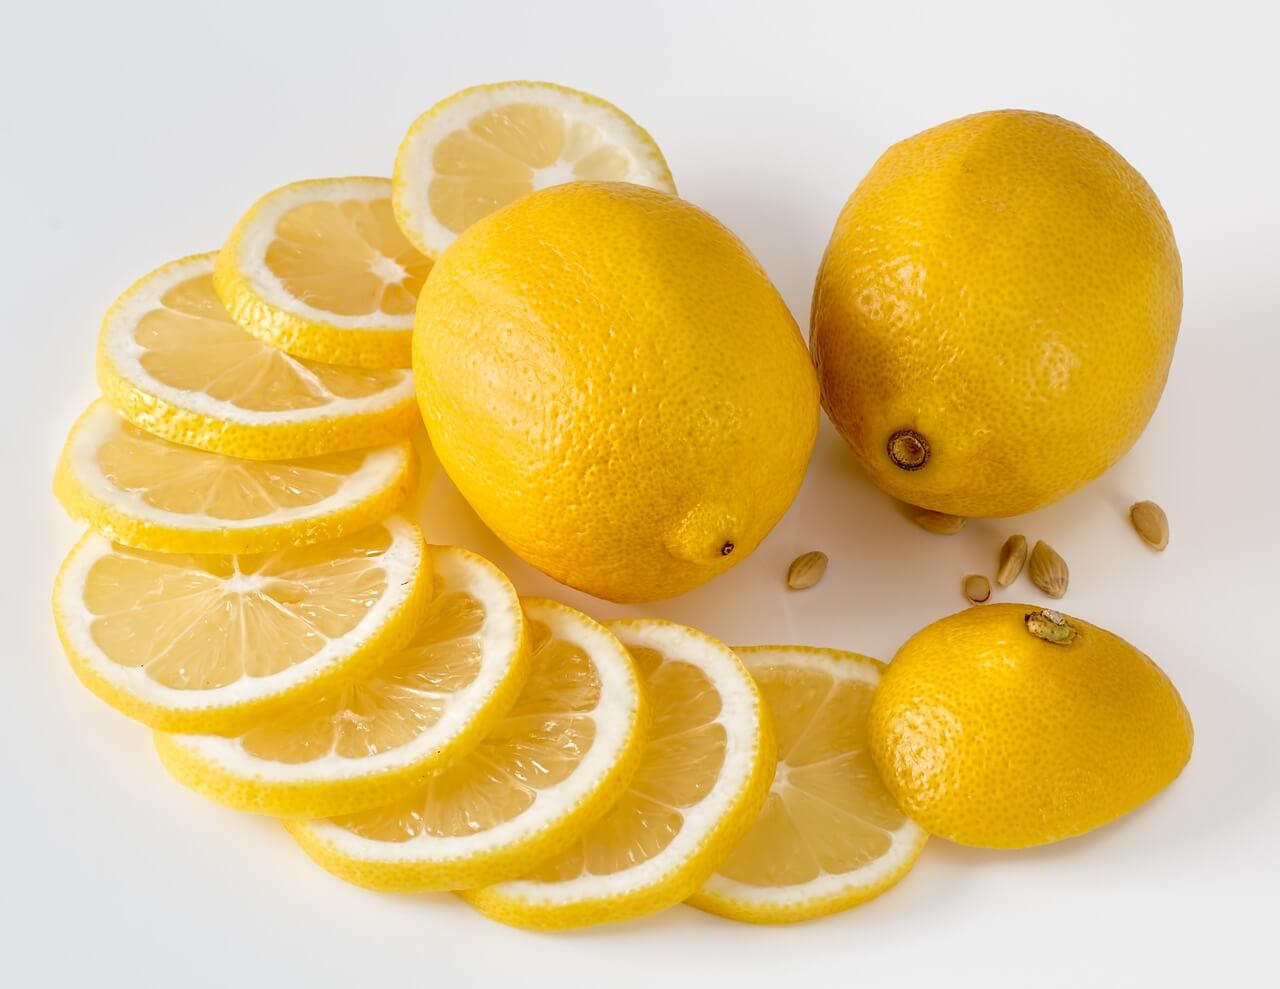 Whole and sliced lemons on a white table